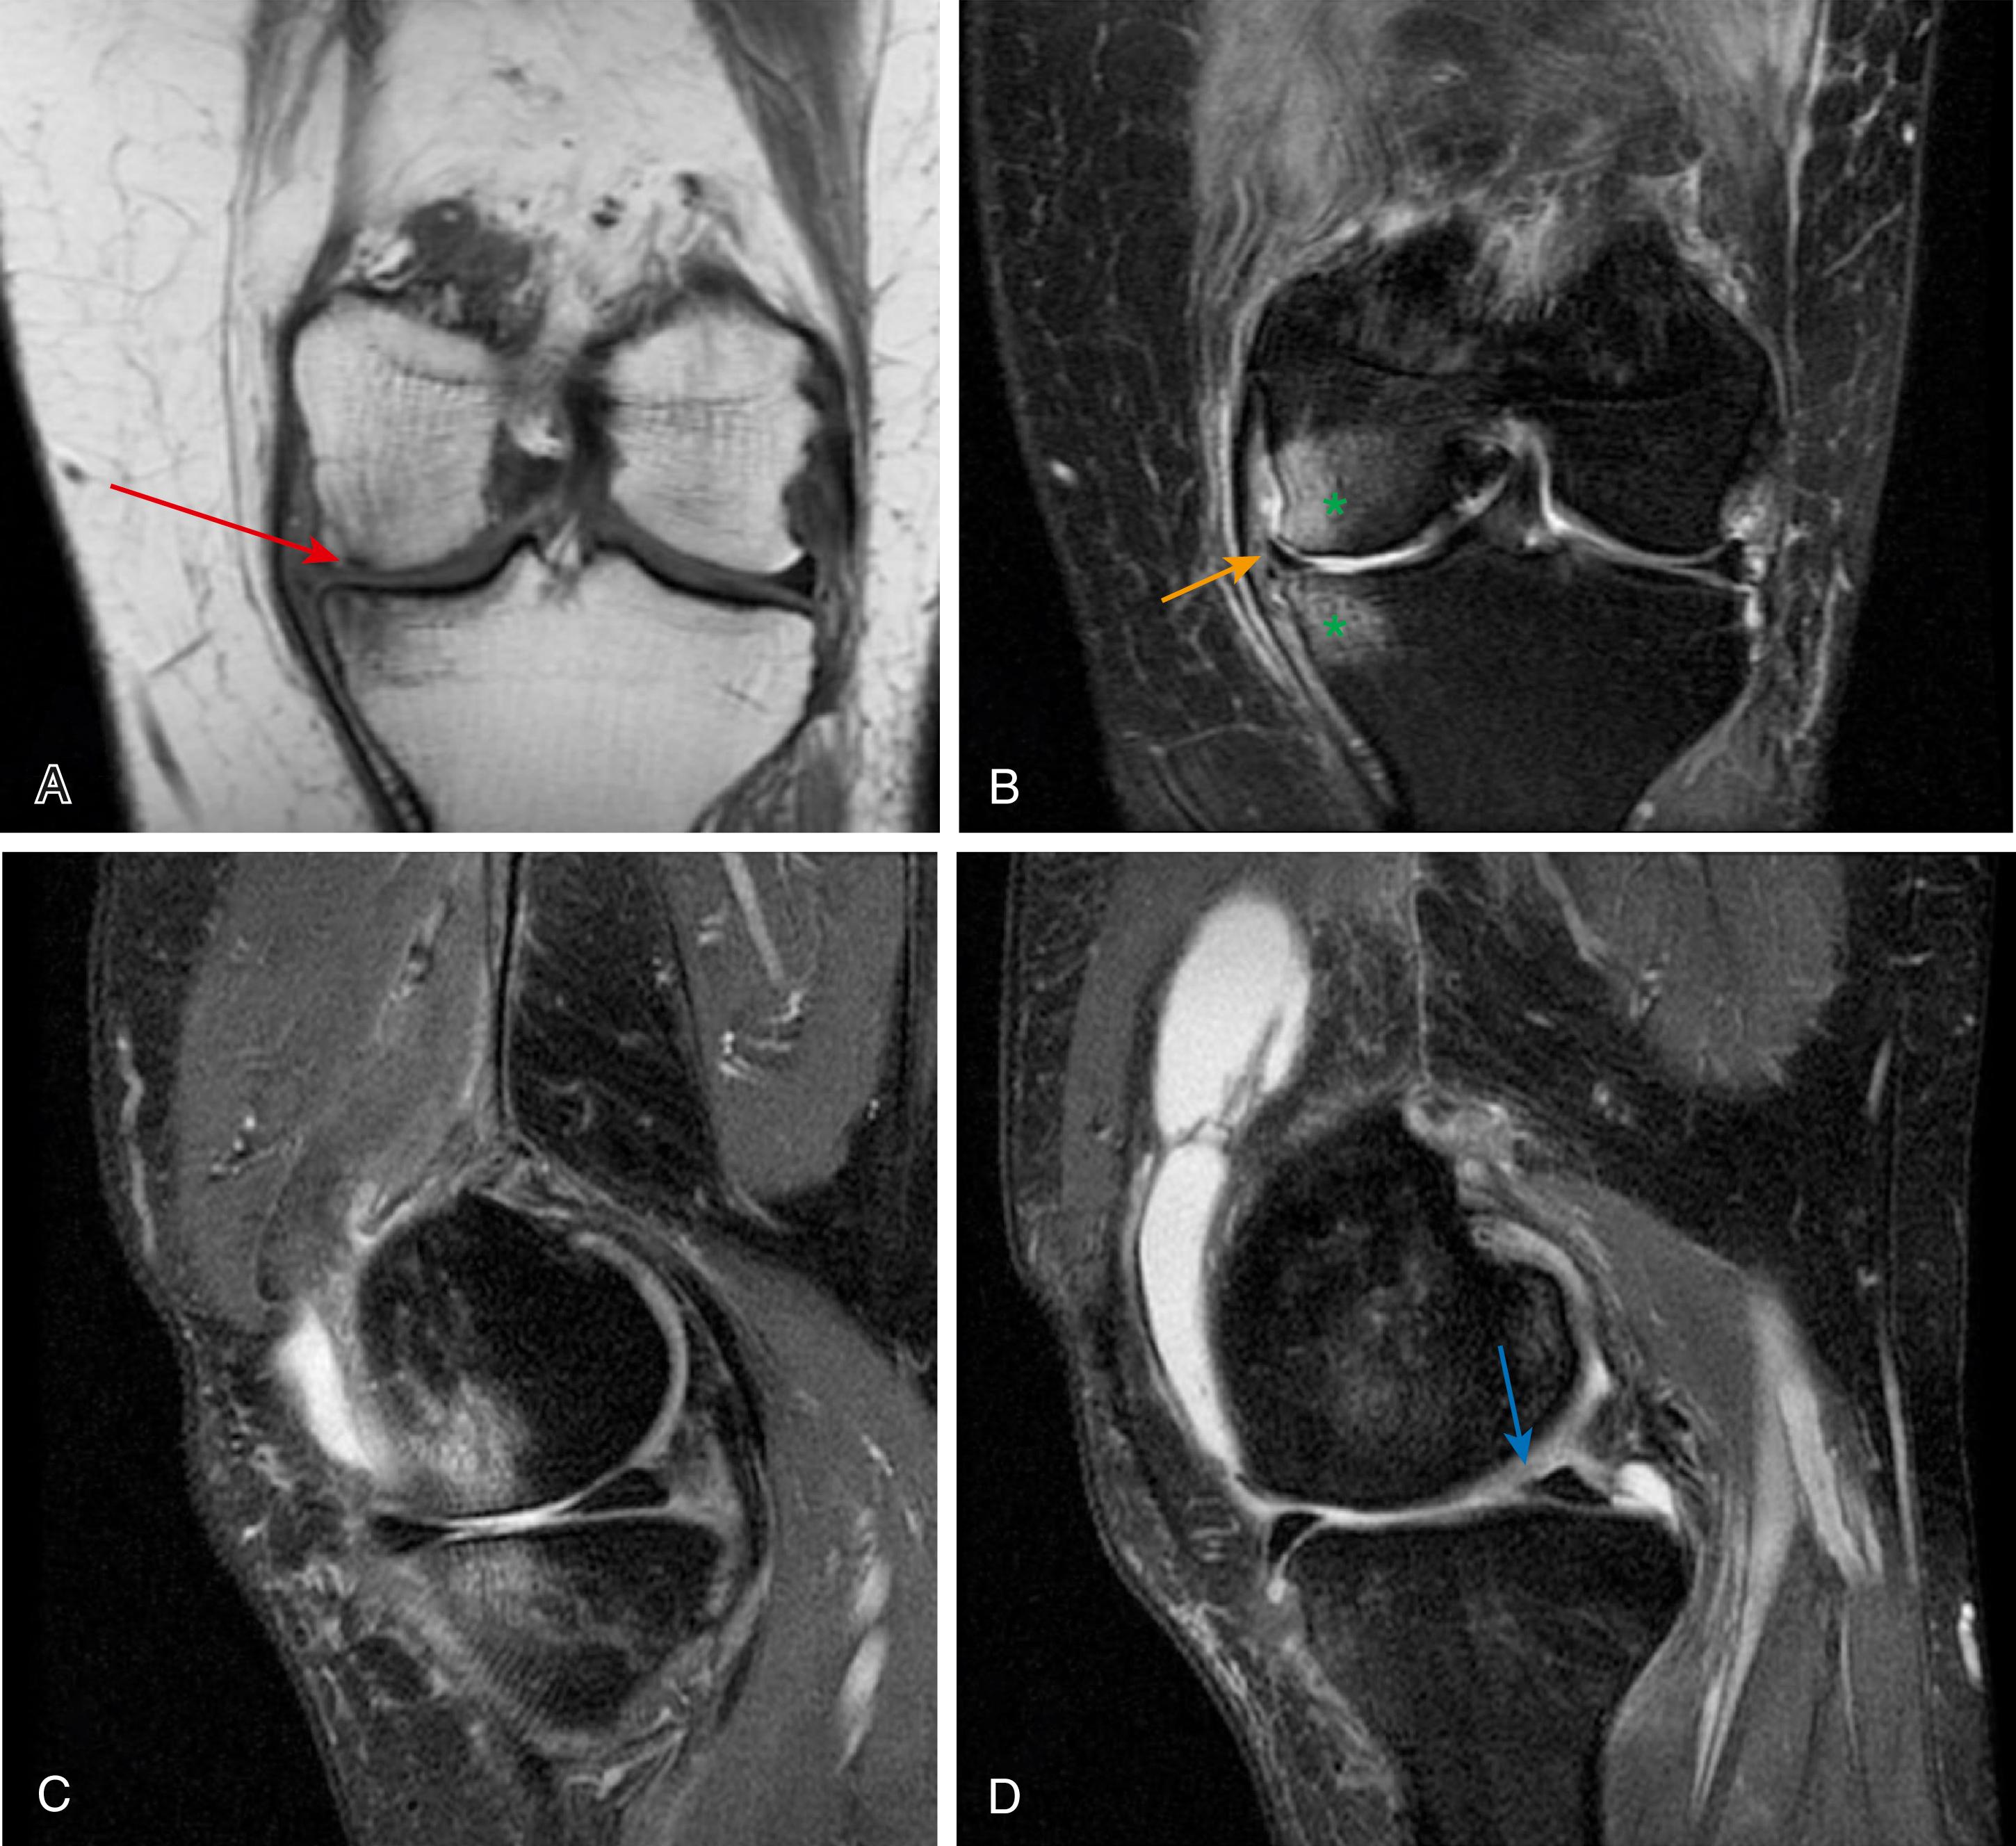 FIG. 173.1, Magnetic resonance imaging of the left knee: coronal T1-W (A) images demonstrating the T1 hypointense subchondral insufficiency fracture line within the medial aspect of the medial femoral condyle measuring 7 mm (red arrow) . (B, C) Coronal proton density fat saturation (PD FS) and sagittal PD FS images at the same level demonstrating the reciprocal bone marrow edema in the medial femoral condyle and medial tibial plateau (asterisks) , as well as a tear of the medial meniscal body (orange arrow) . (D) . Sagittal PD FS image at the level of the posterior horn/root junction of the medial meniscus demonstrating blunting of the medial meniscus compatible with free edge radial tear (blue arrow) .